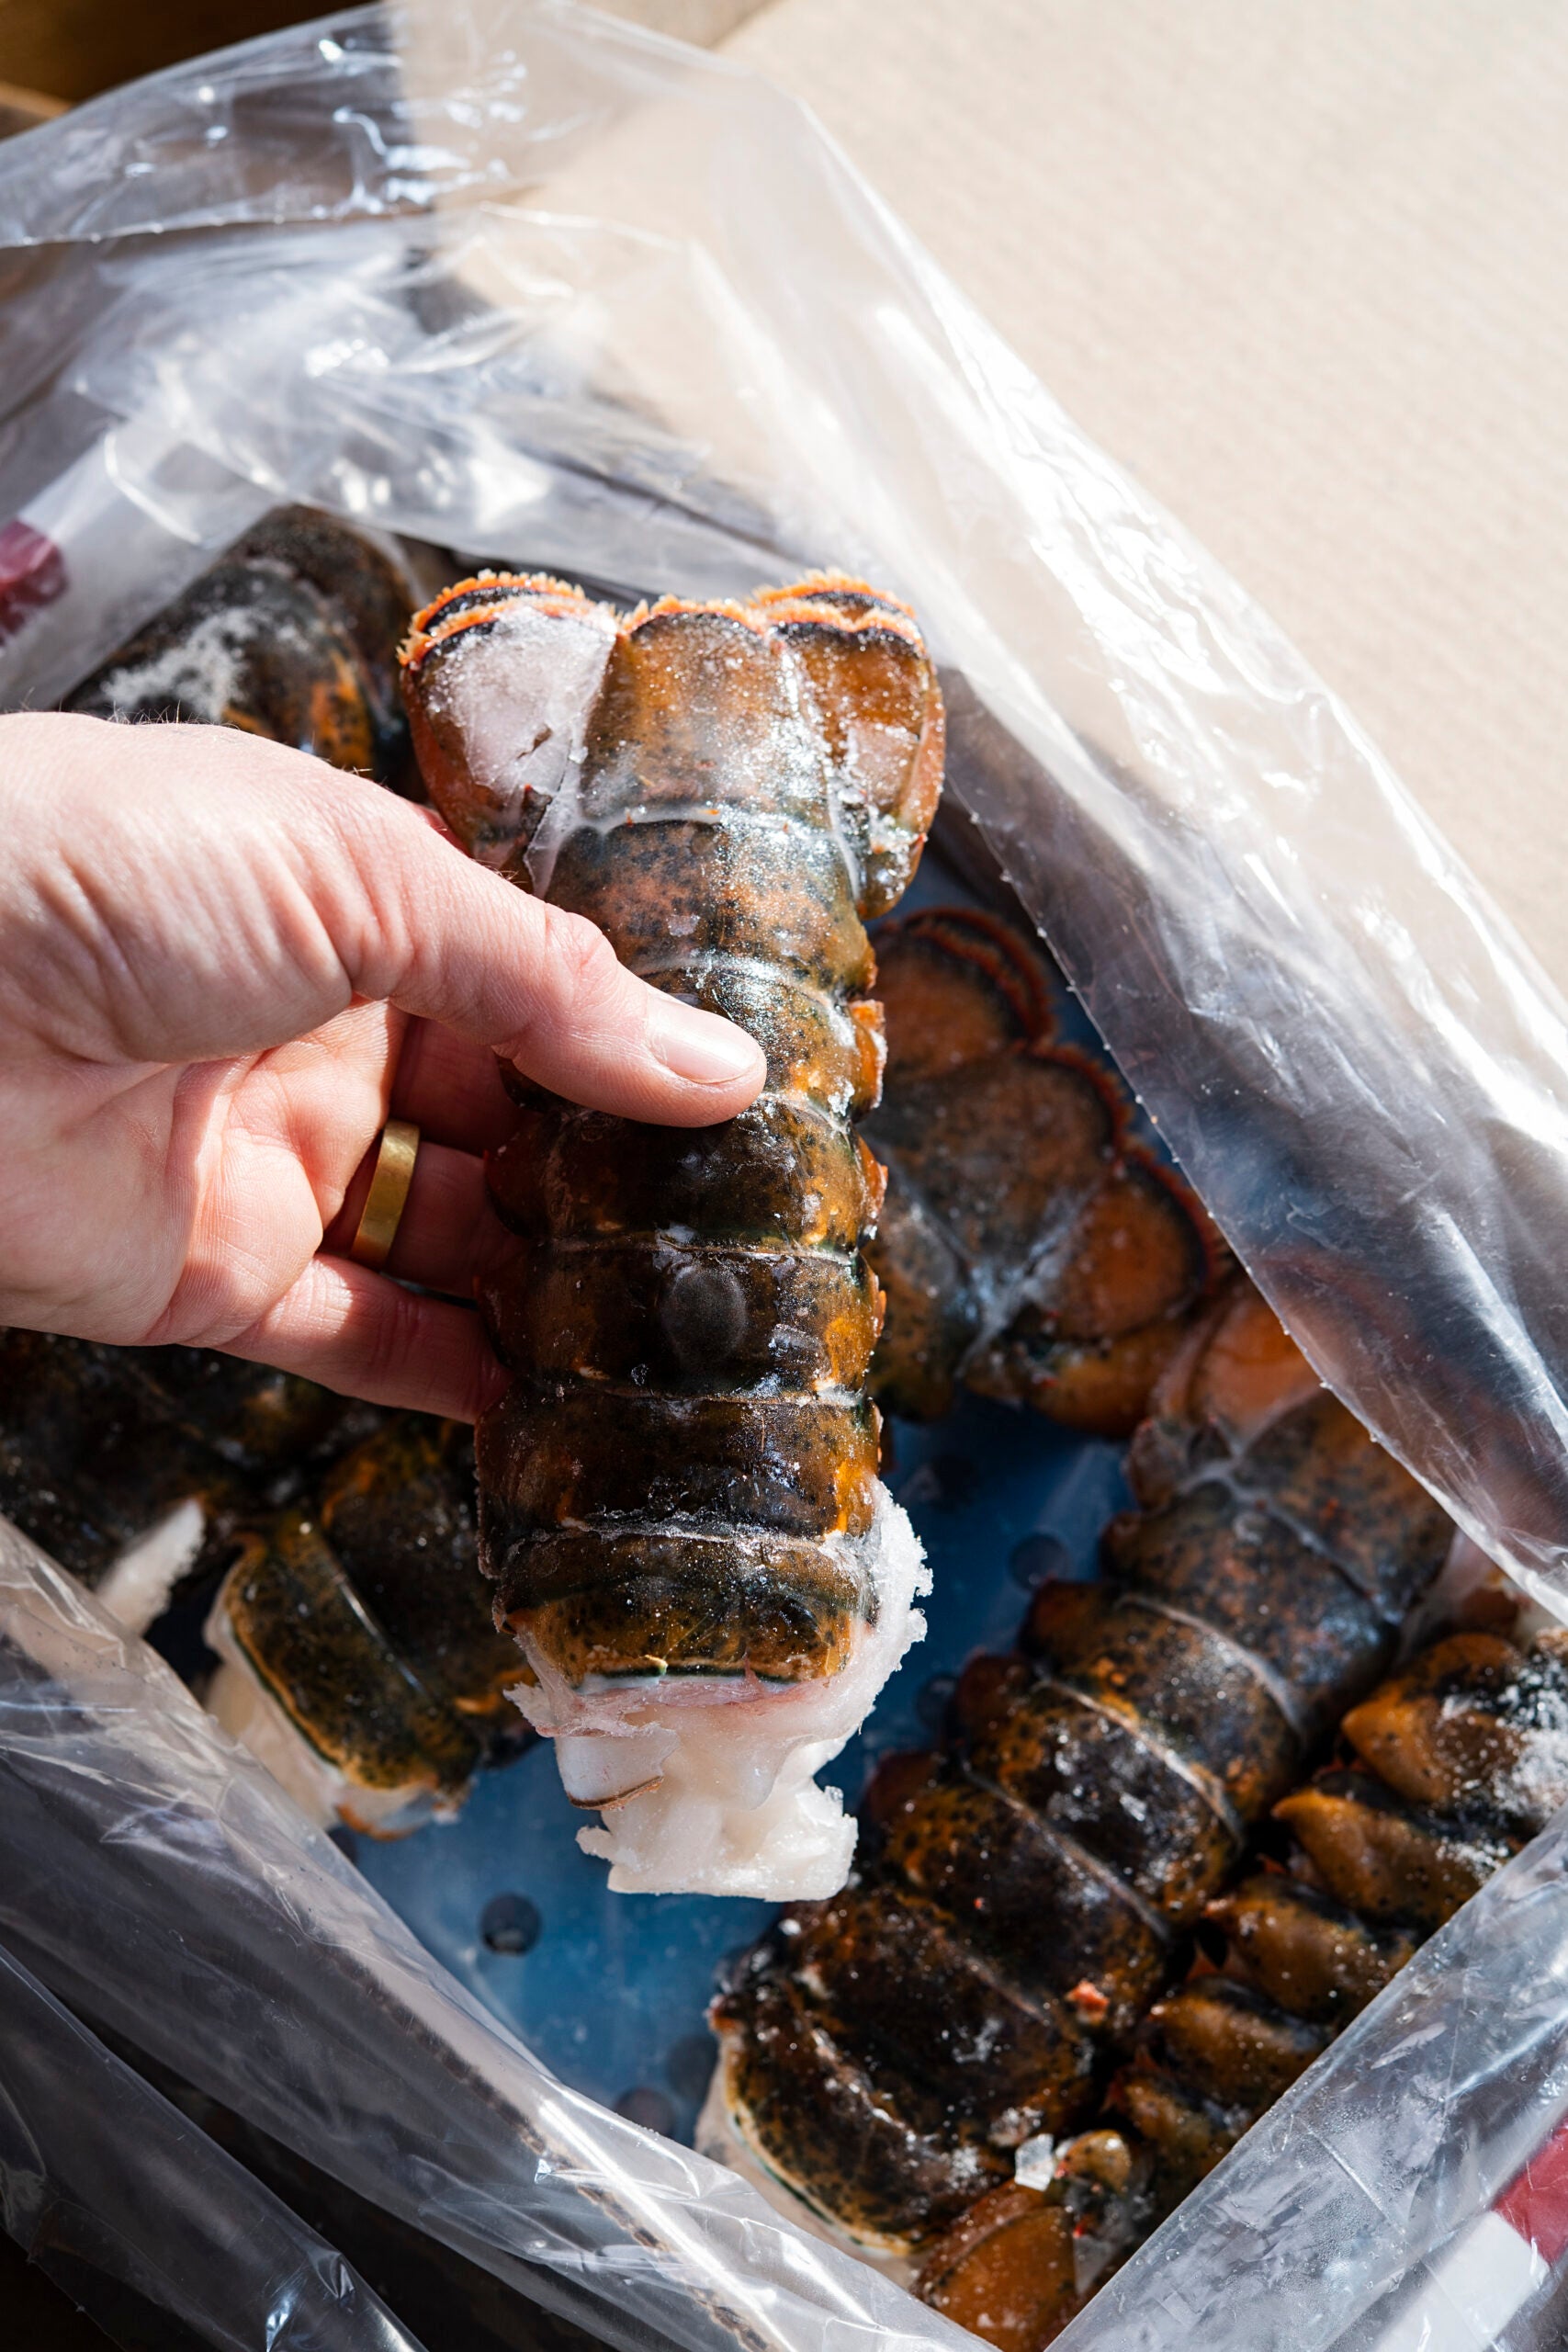 Maine Lobster Tails - Wild Tide Seafoods